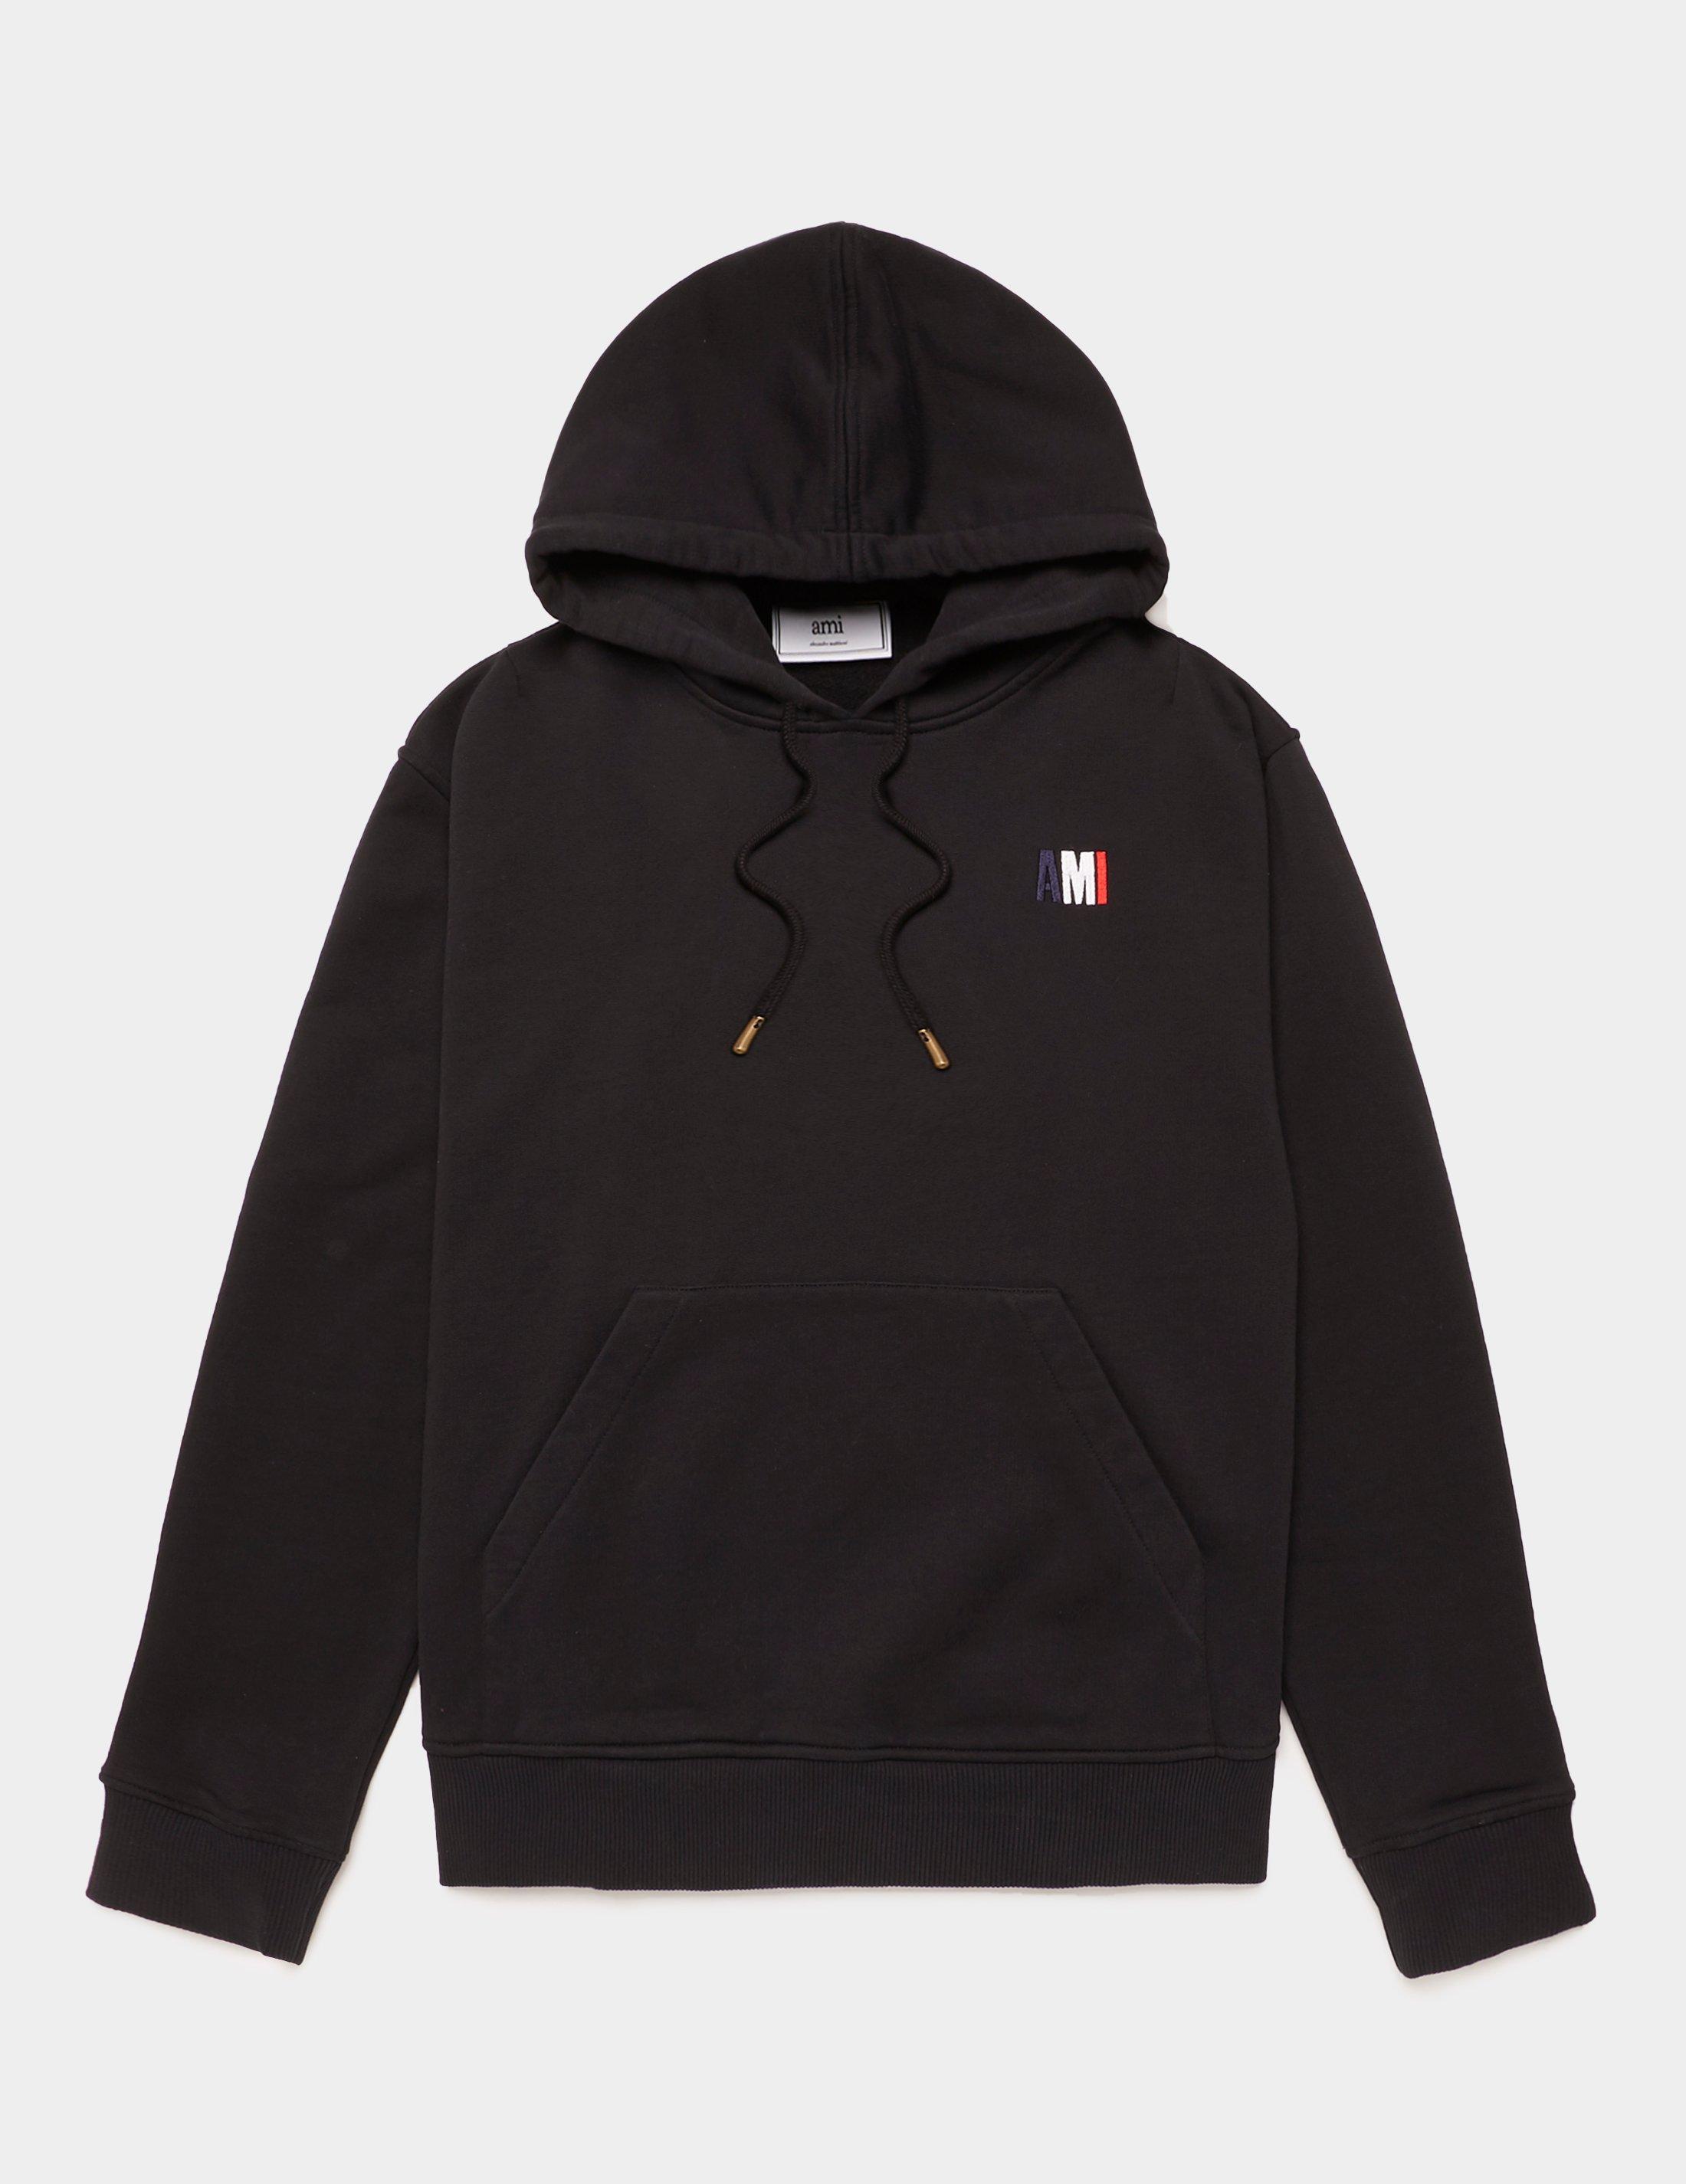 AMI Cotton Small Logo Hoodie Black for Men - Lyst